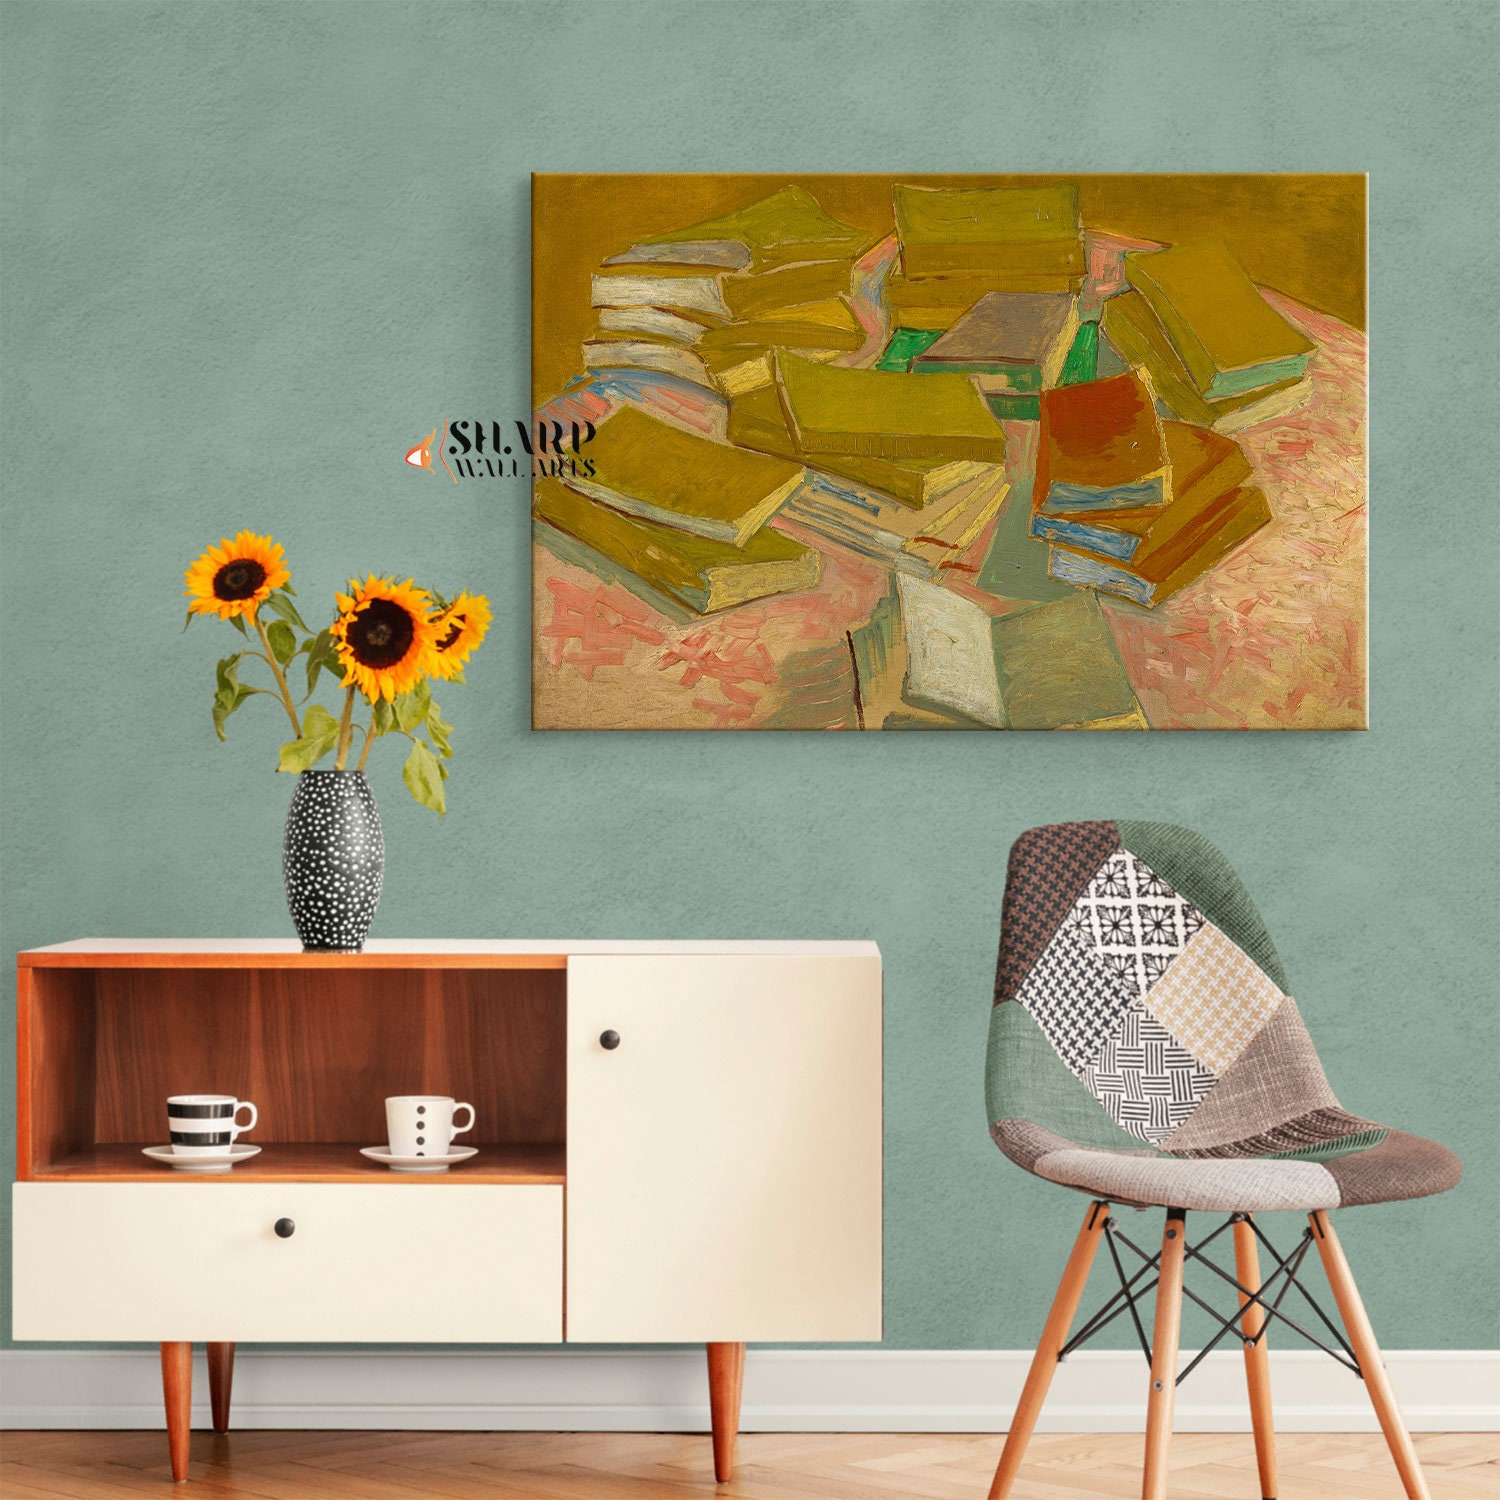 Art Prints of Piles of French Novels by Van Gogh